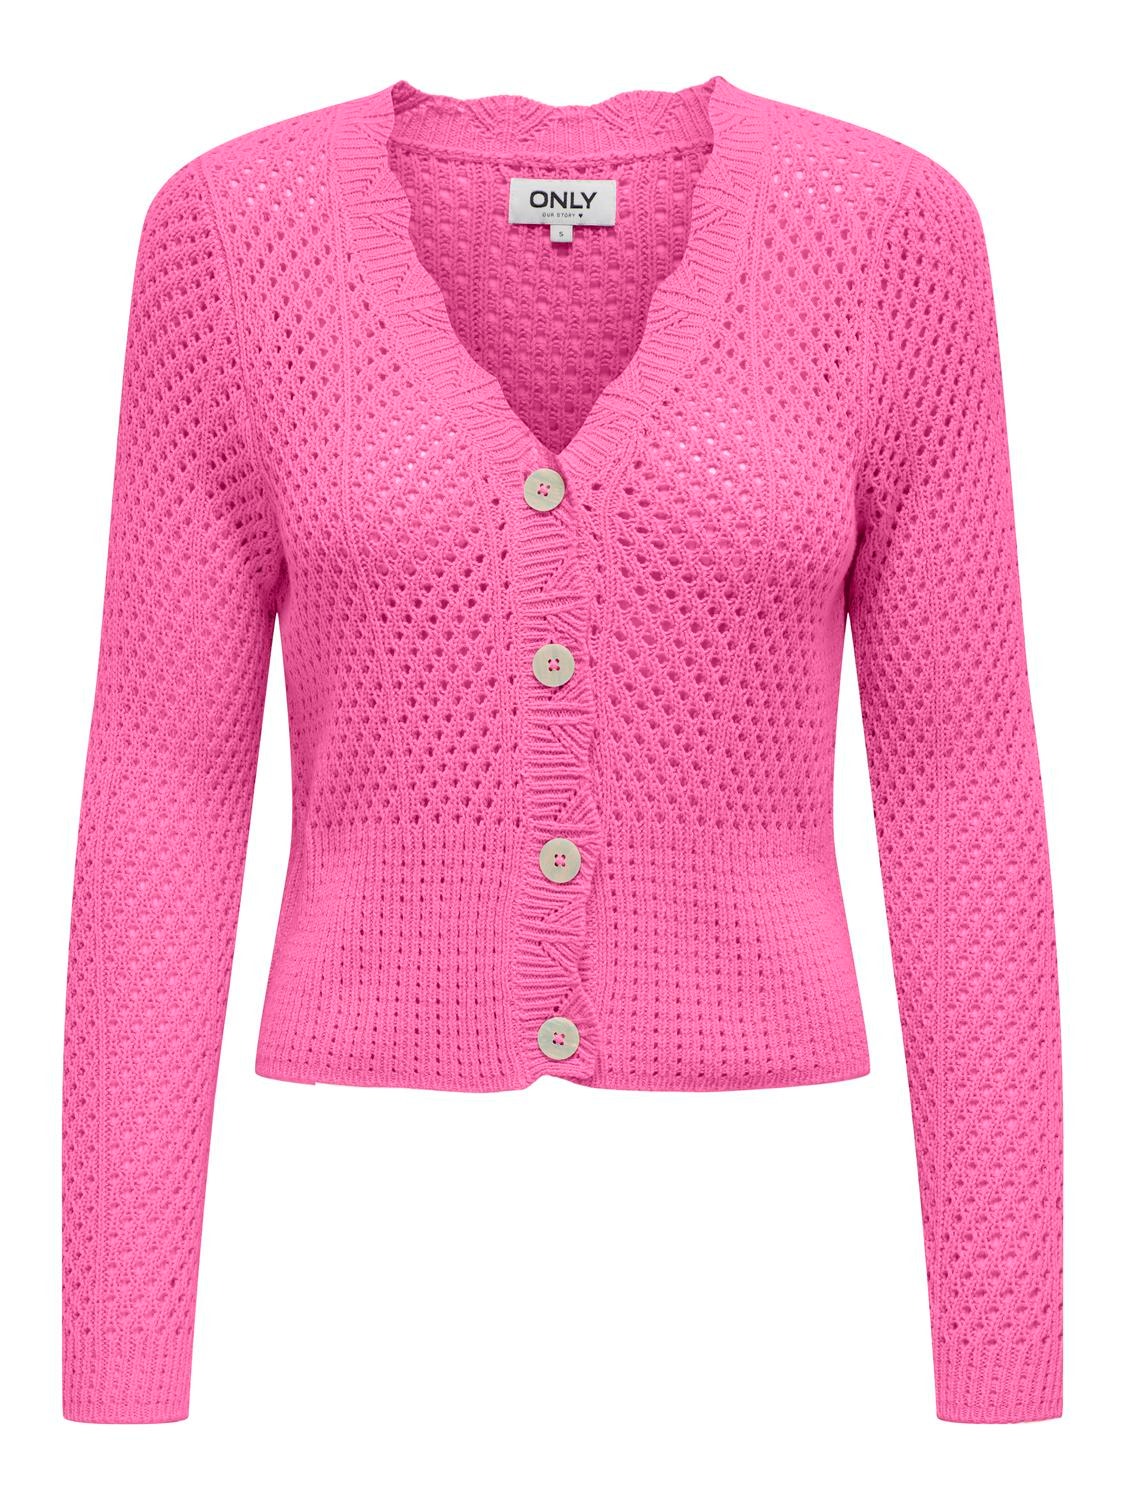 ONLY American Fit V-Neck Ribbed cuffs Knit Cardigan -Strawberry Moon - 15314647